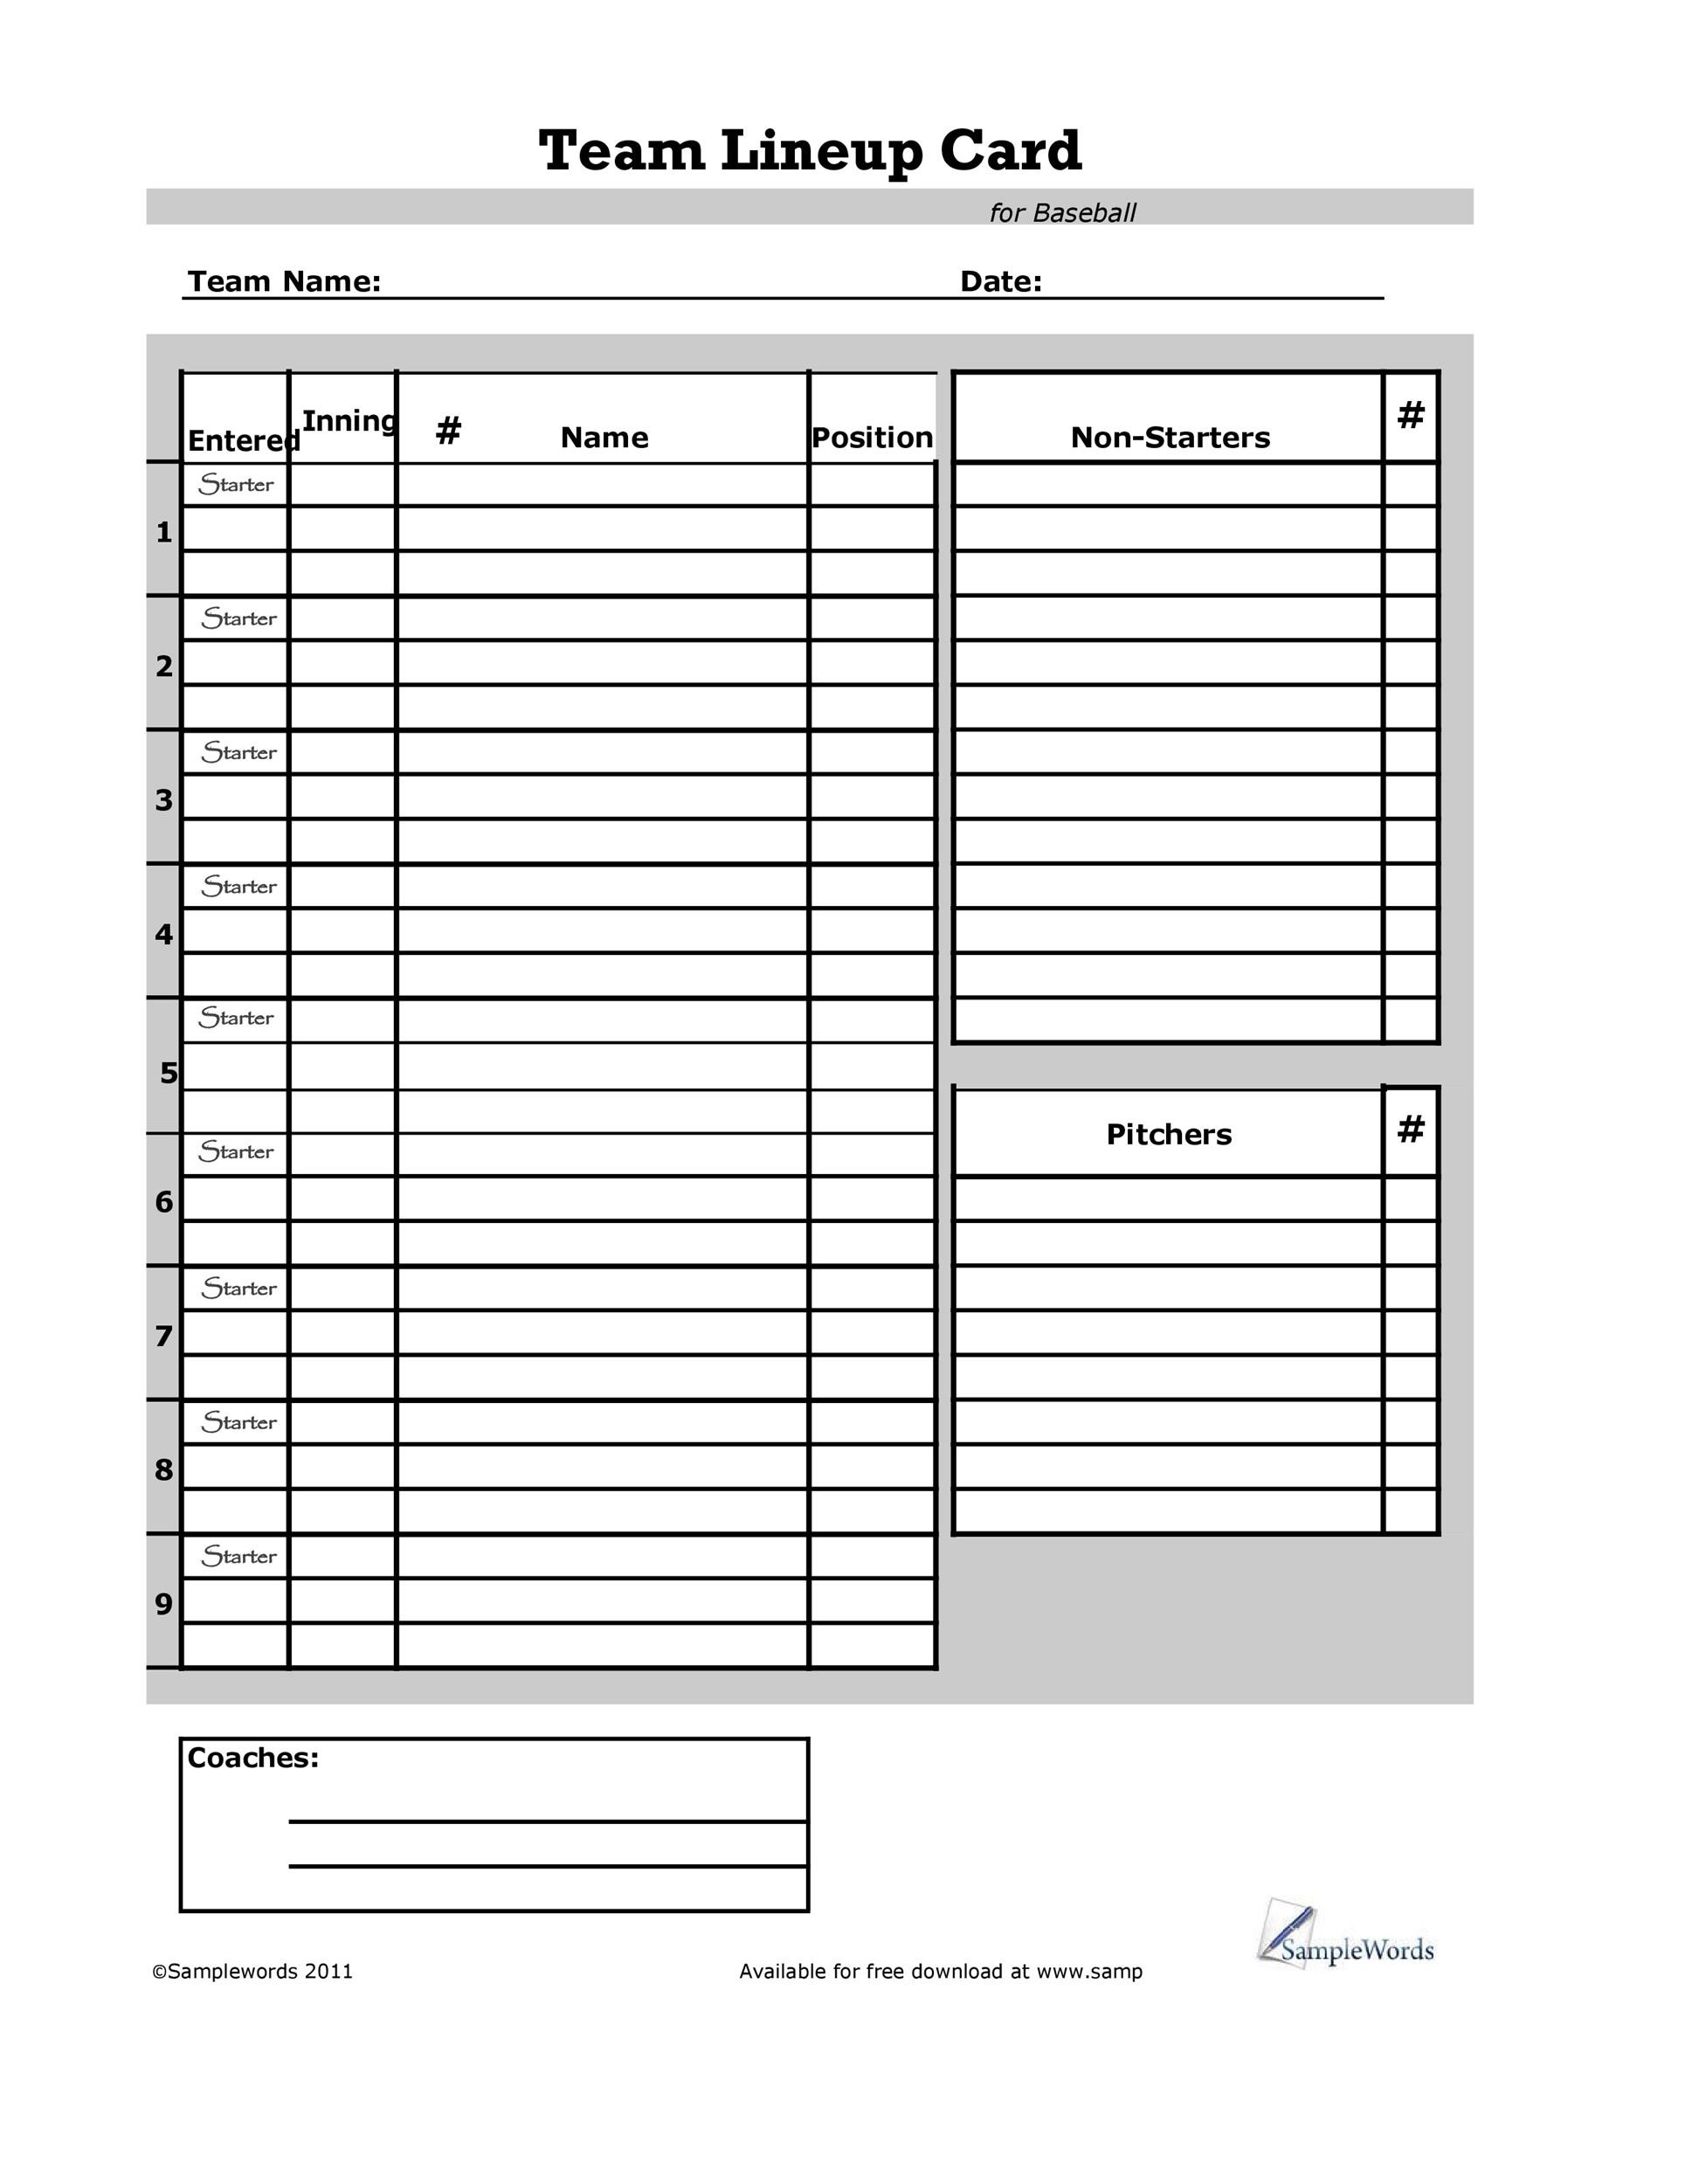 View 21 Inning Baseball Lineup Template Background : Fill, Sign And In Free Baseball Lineup Card Template